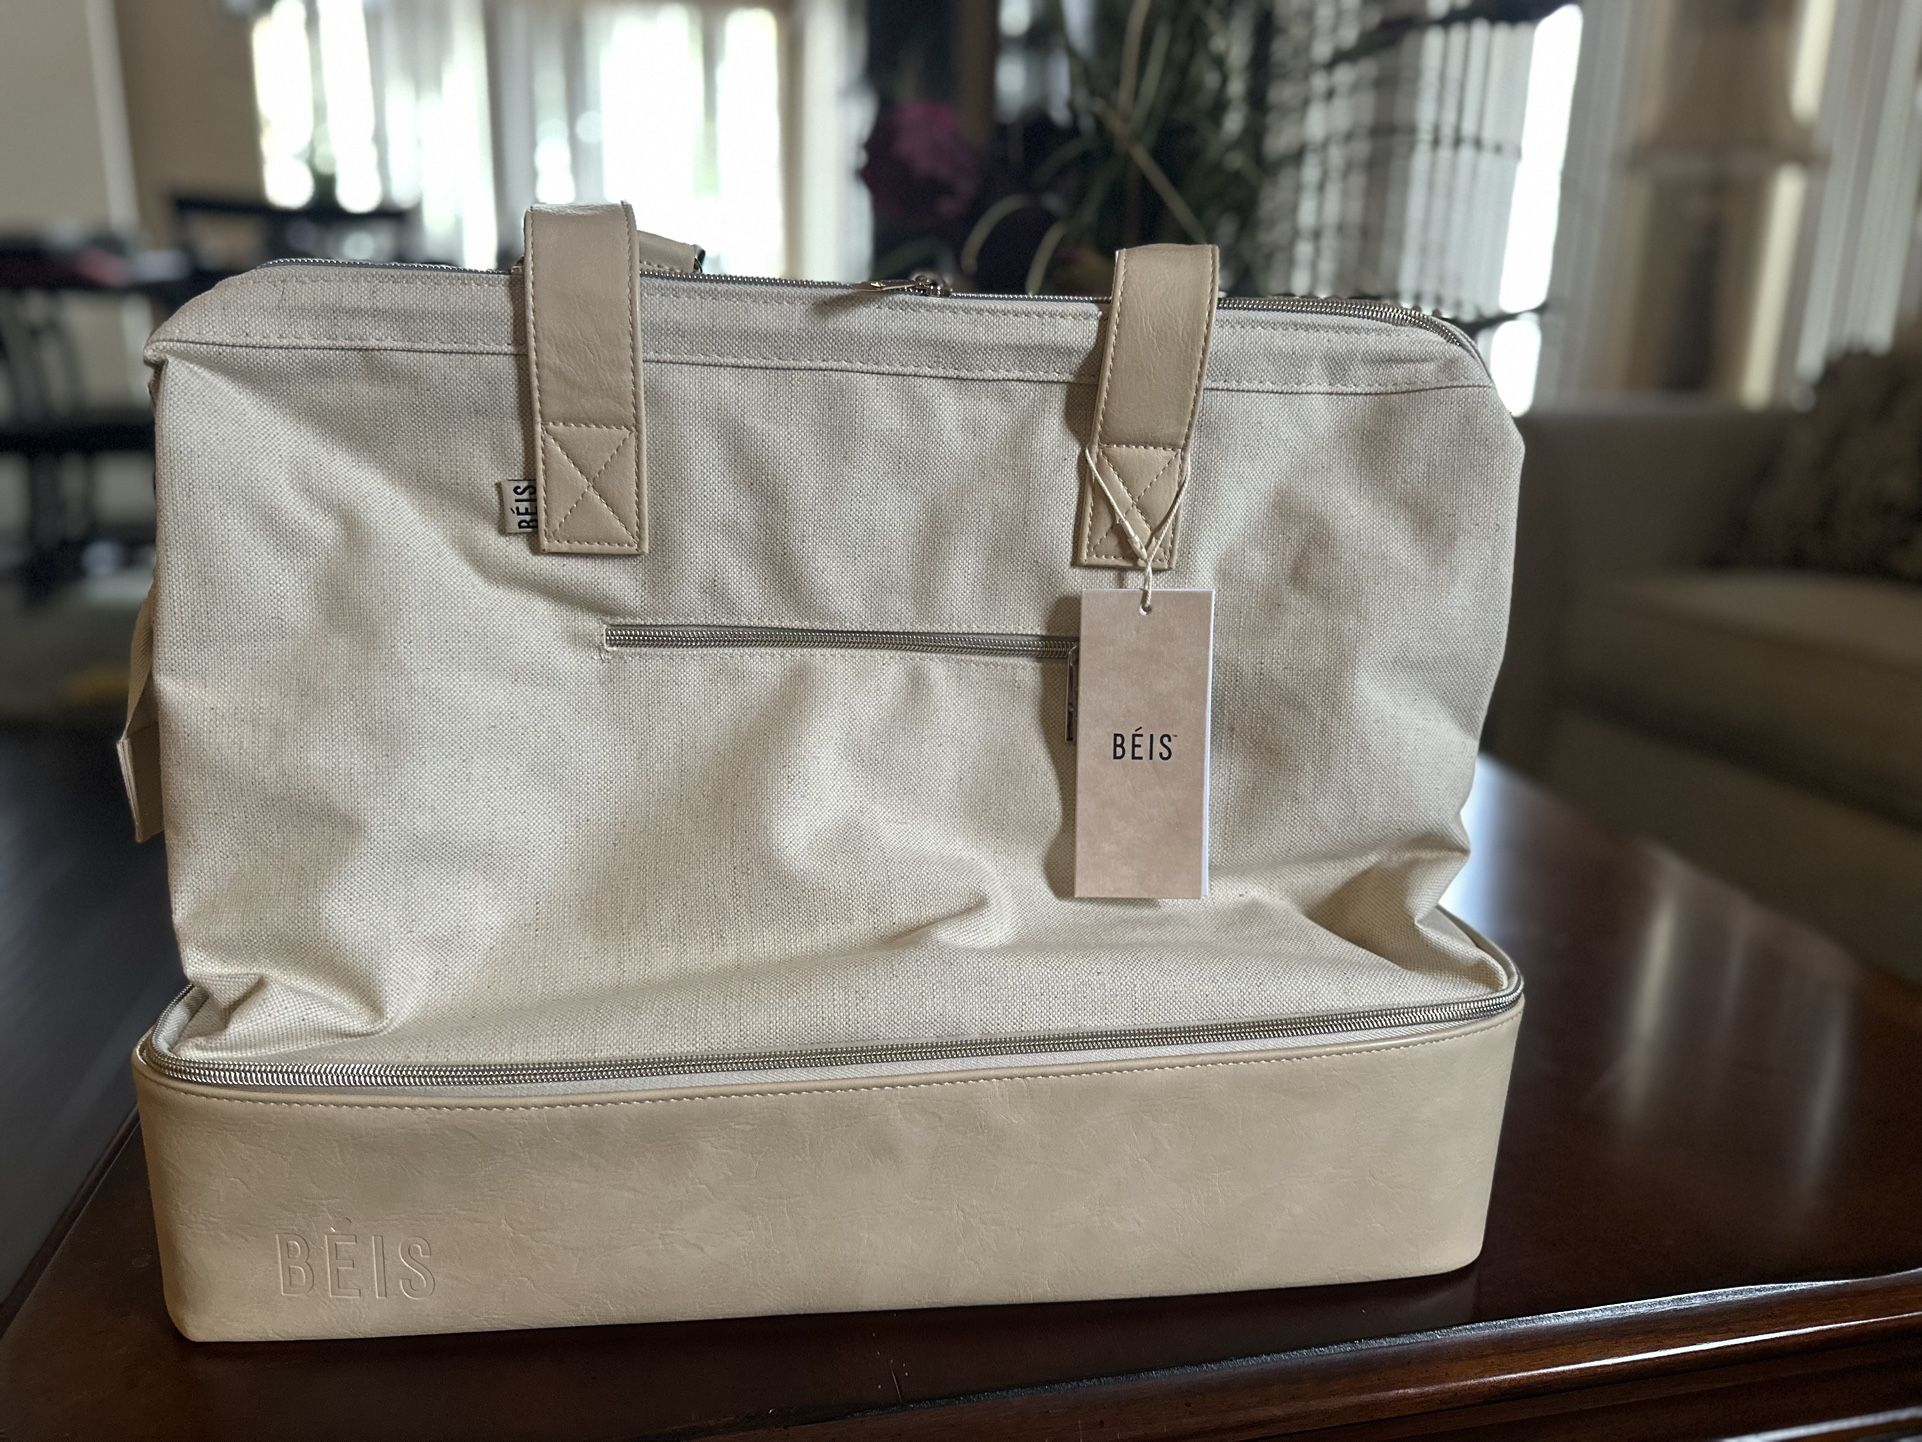 Beachkin bag for Sale in Los Angeles, CA - OfferUp